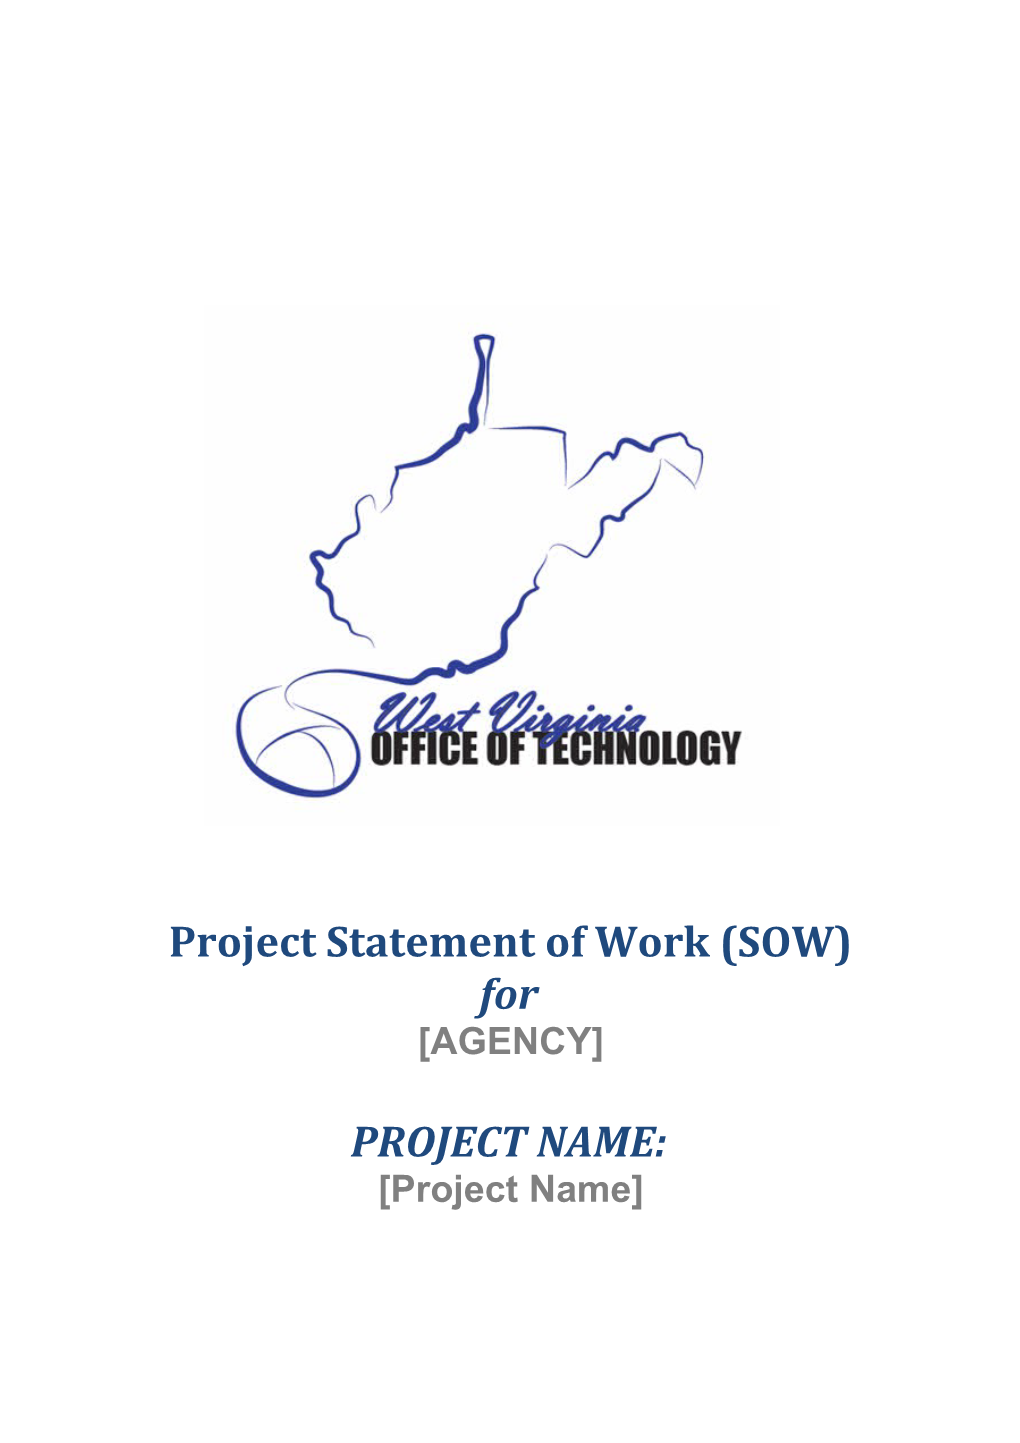 Project Statement of Work (SOW)